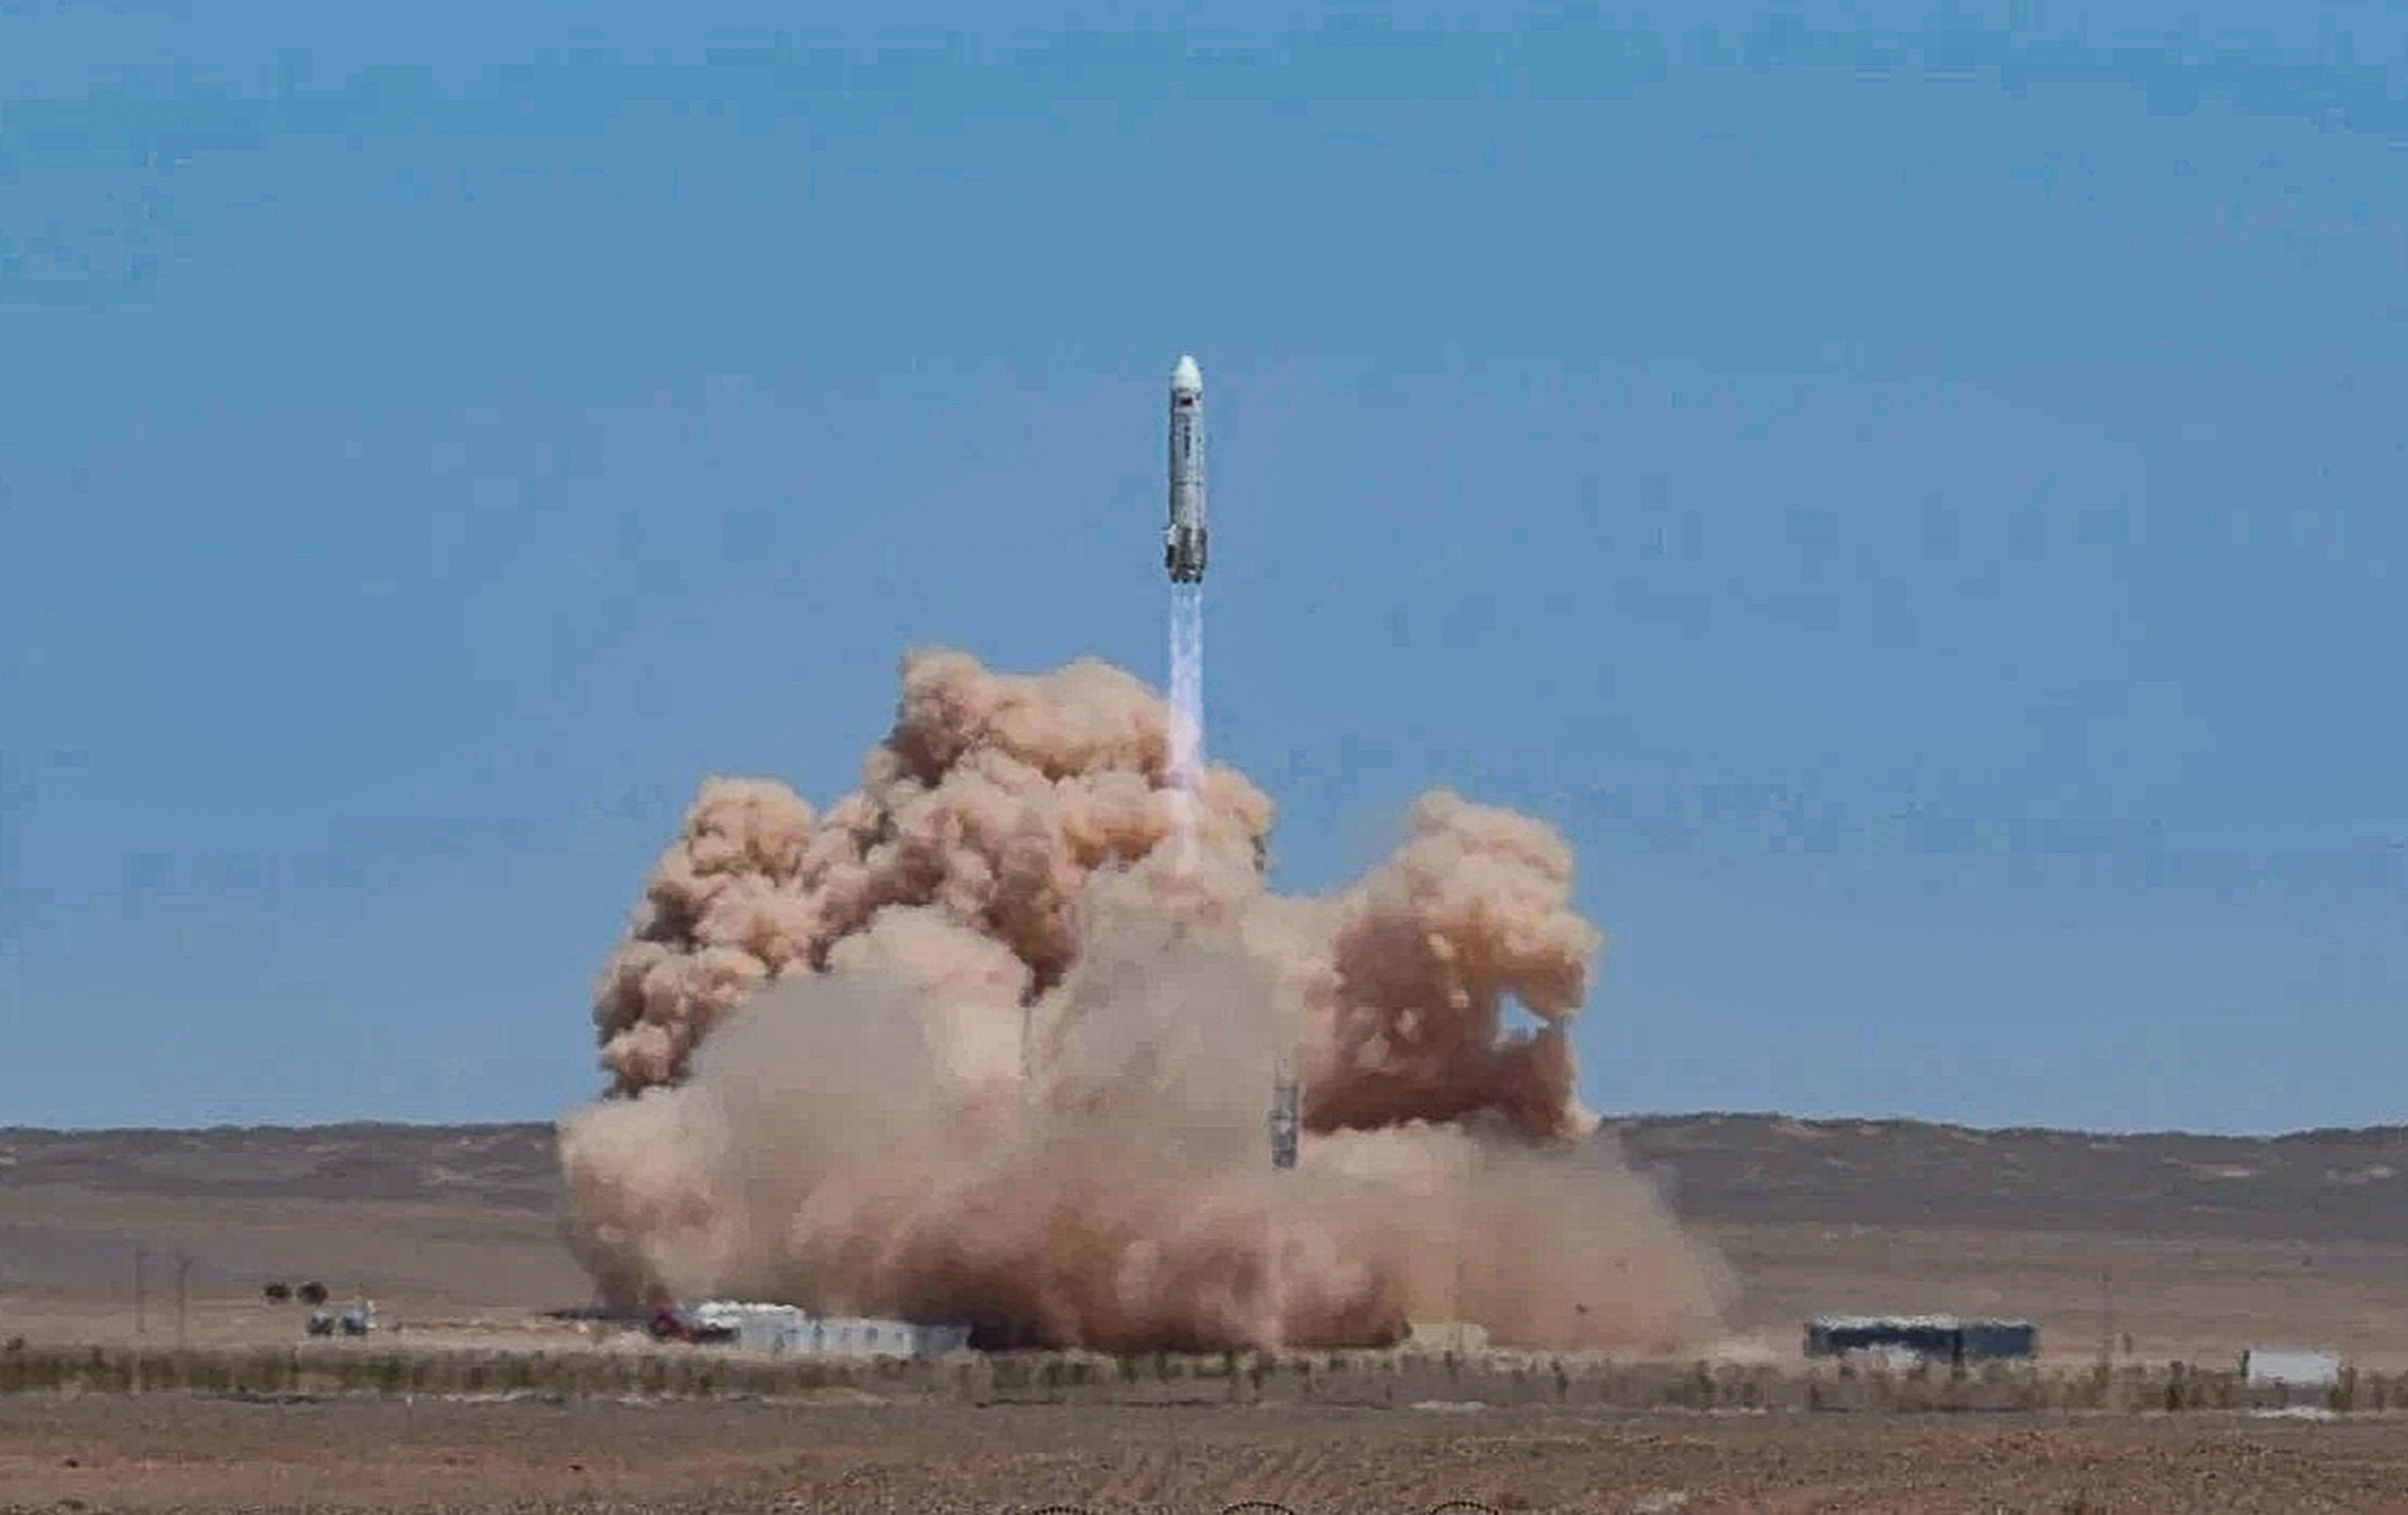 The reusable rocket, developed by the Shanghai Academy of Spaceflight Technology, lifts off from the Jiuquan Satellite Launch Centre in northwestern China’s Gobi Desert on Sunday. Photo: SAST